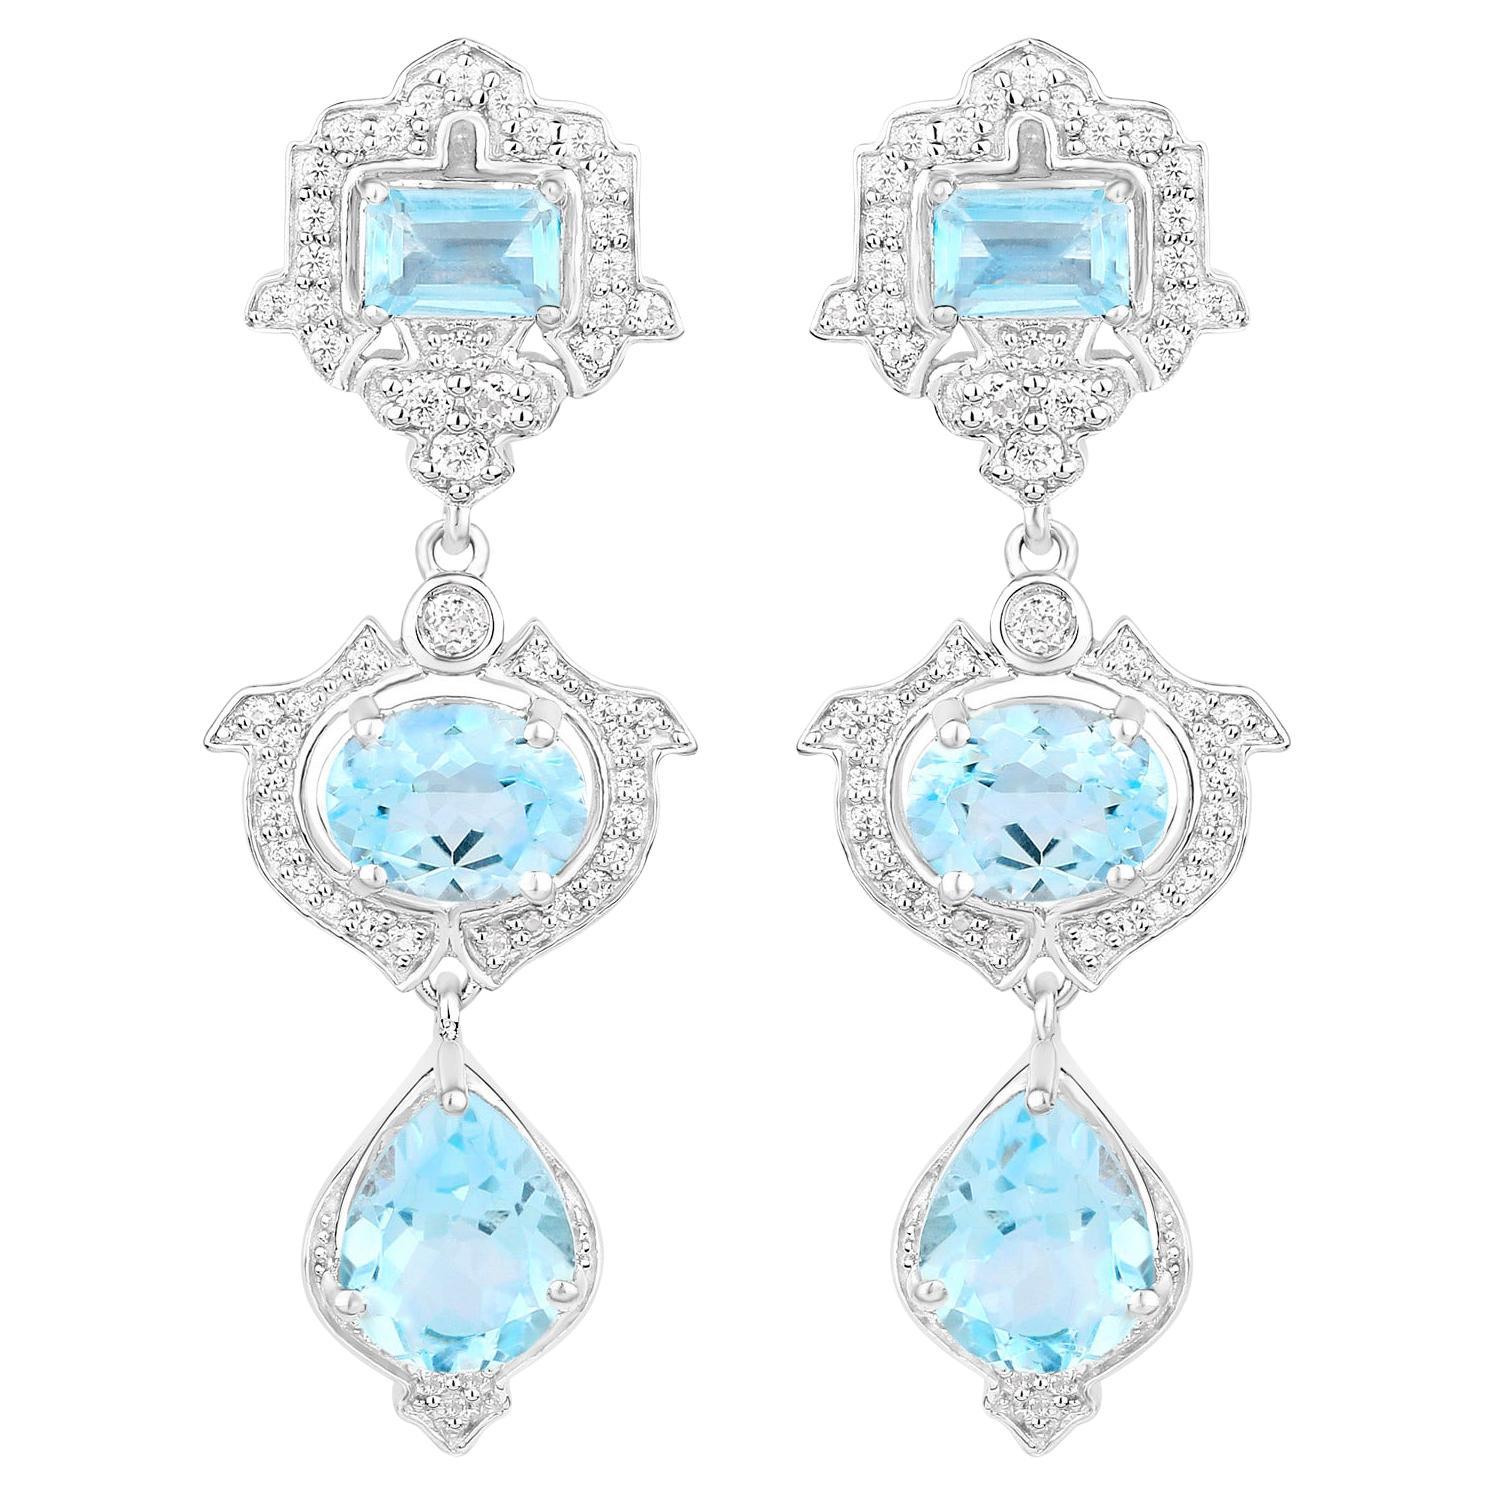 Topaz Dangle Earrings 9.07 Carats Rhodium Plated Sterling Silver